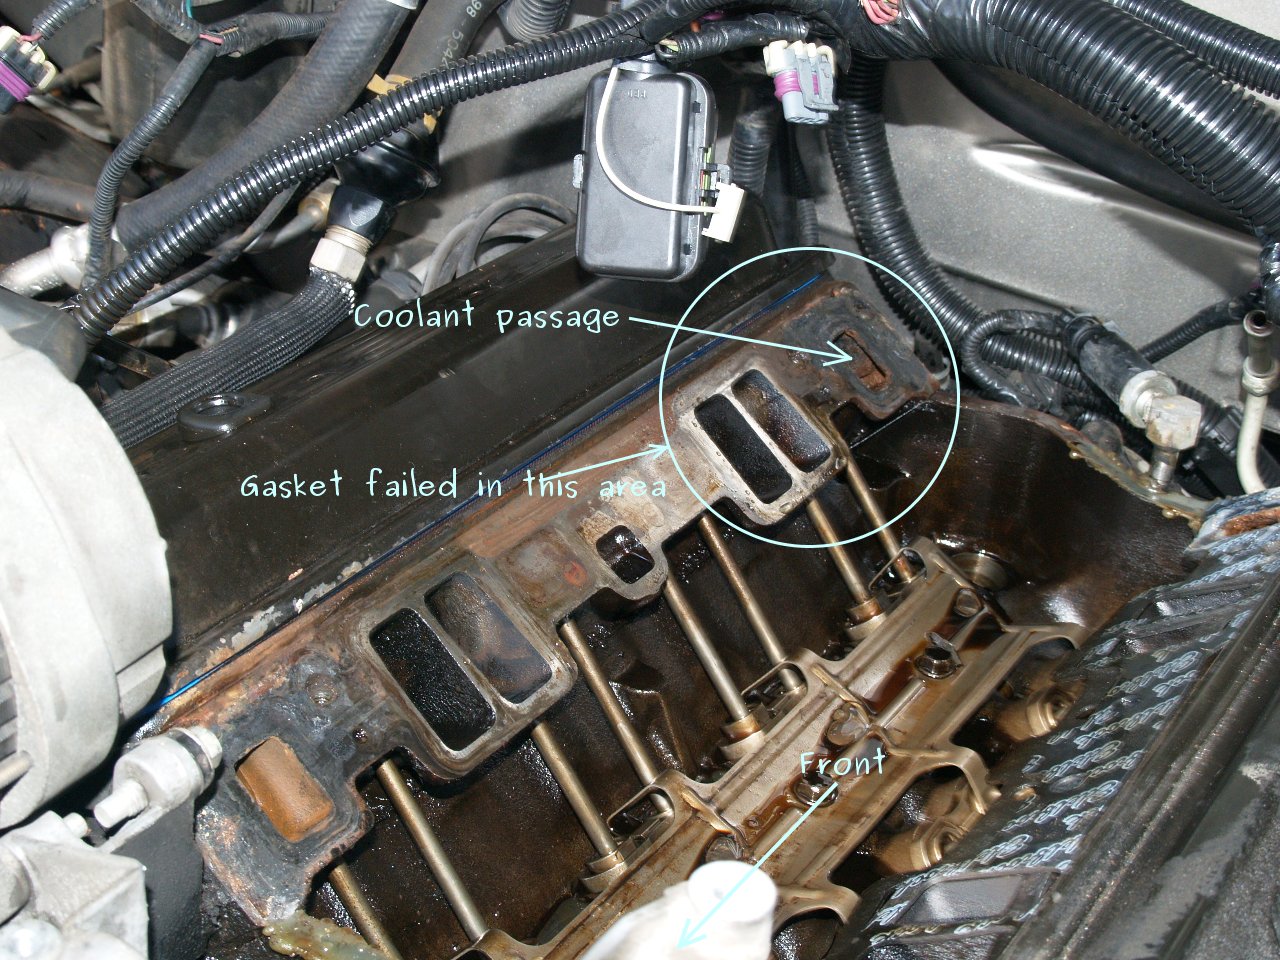 See P3807 in engine